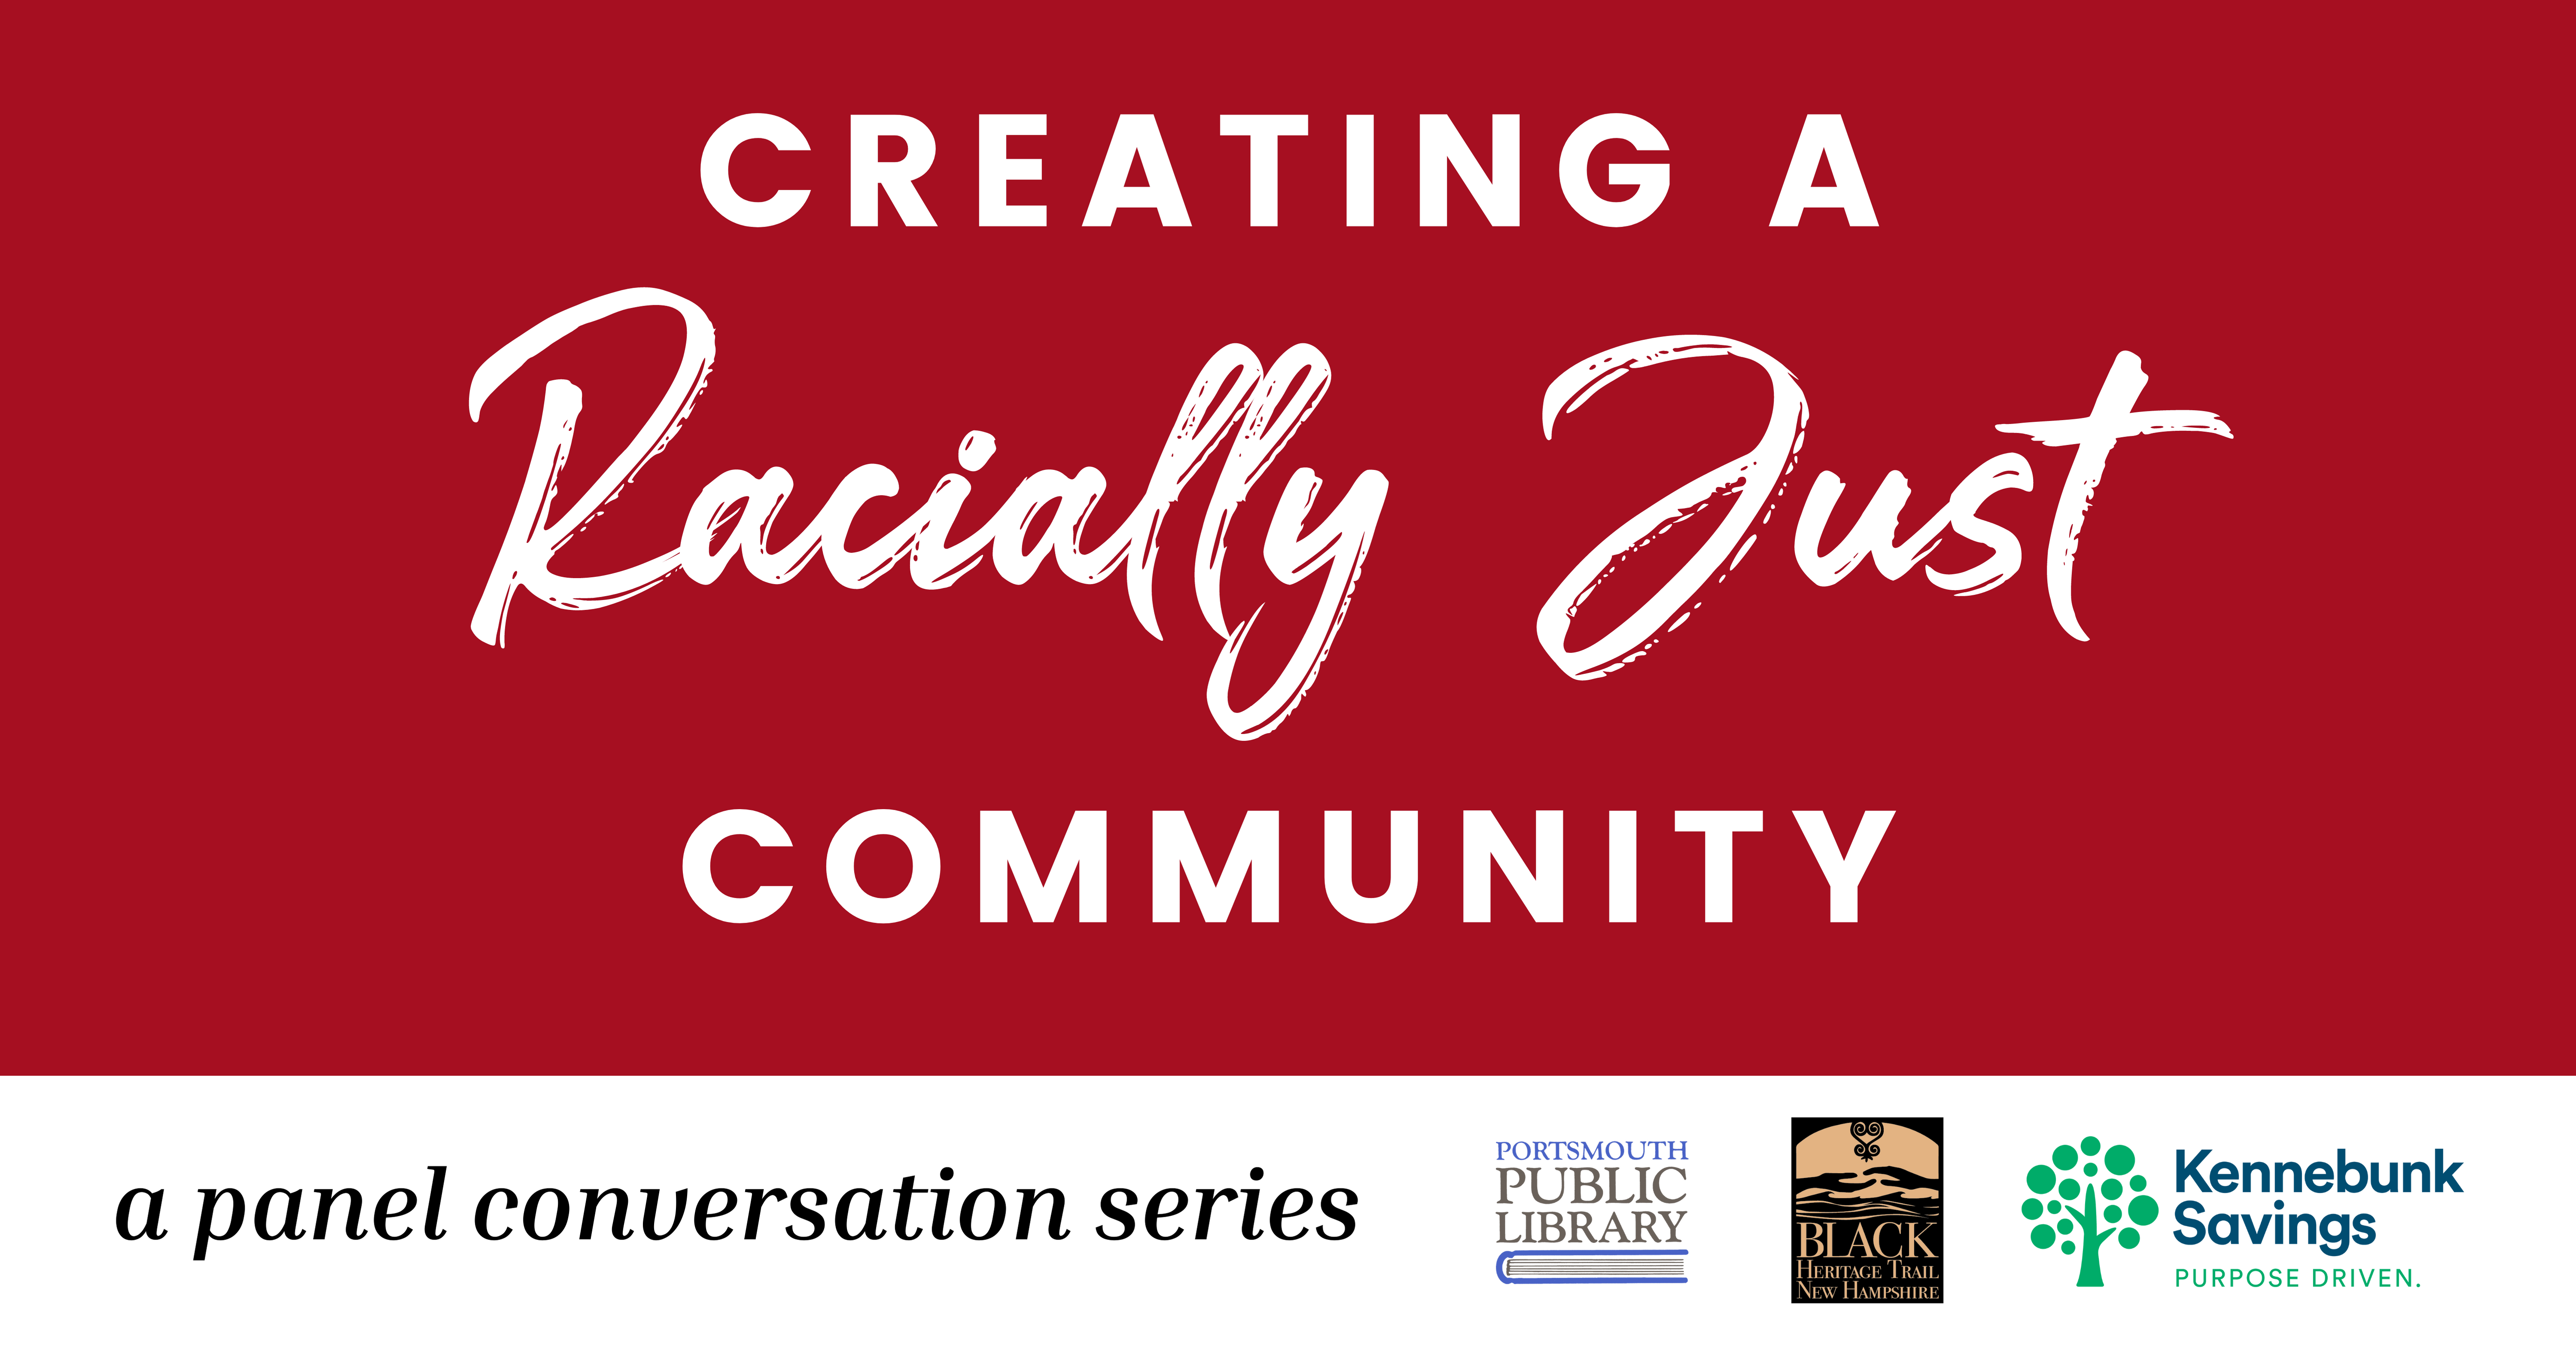 Creating a Racially Just Community: A Panel Conversation Series